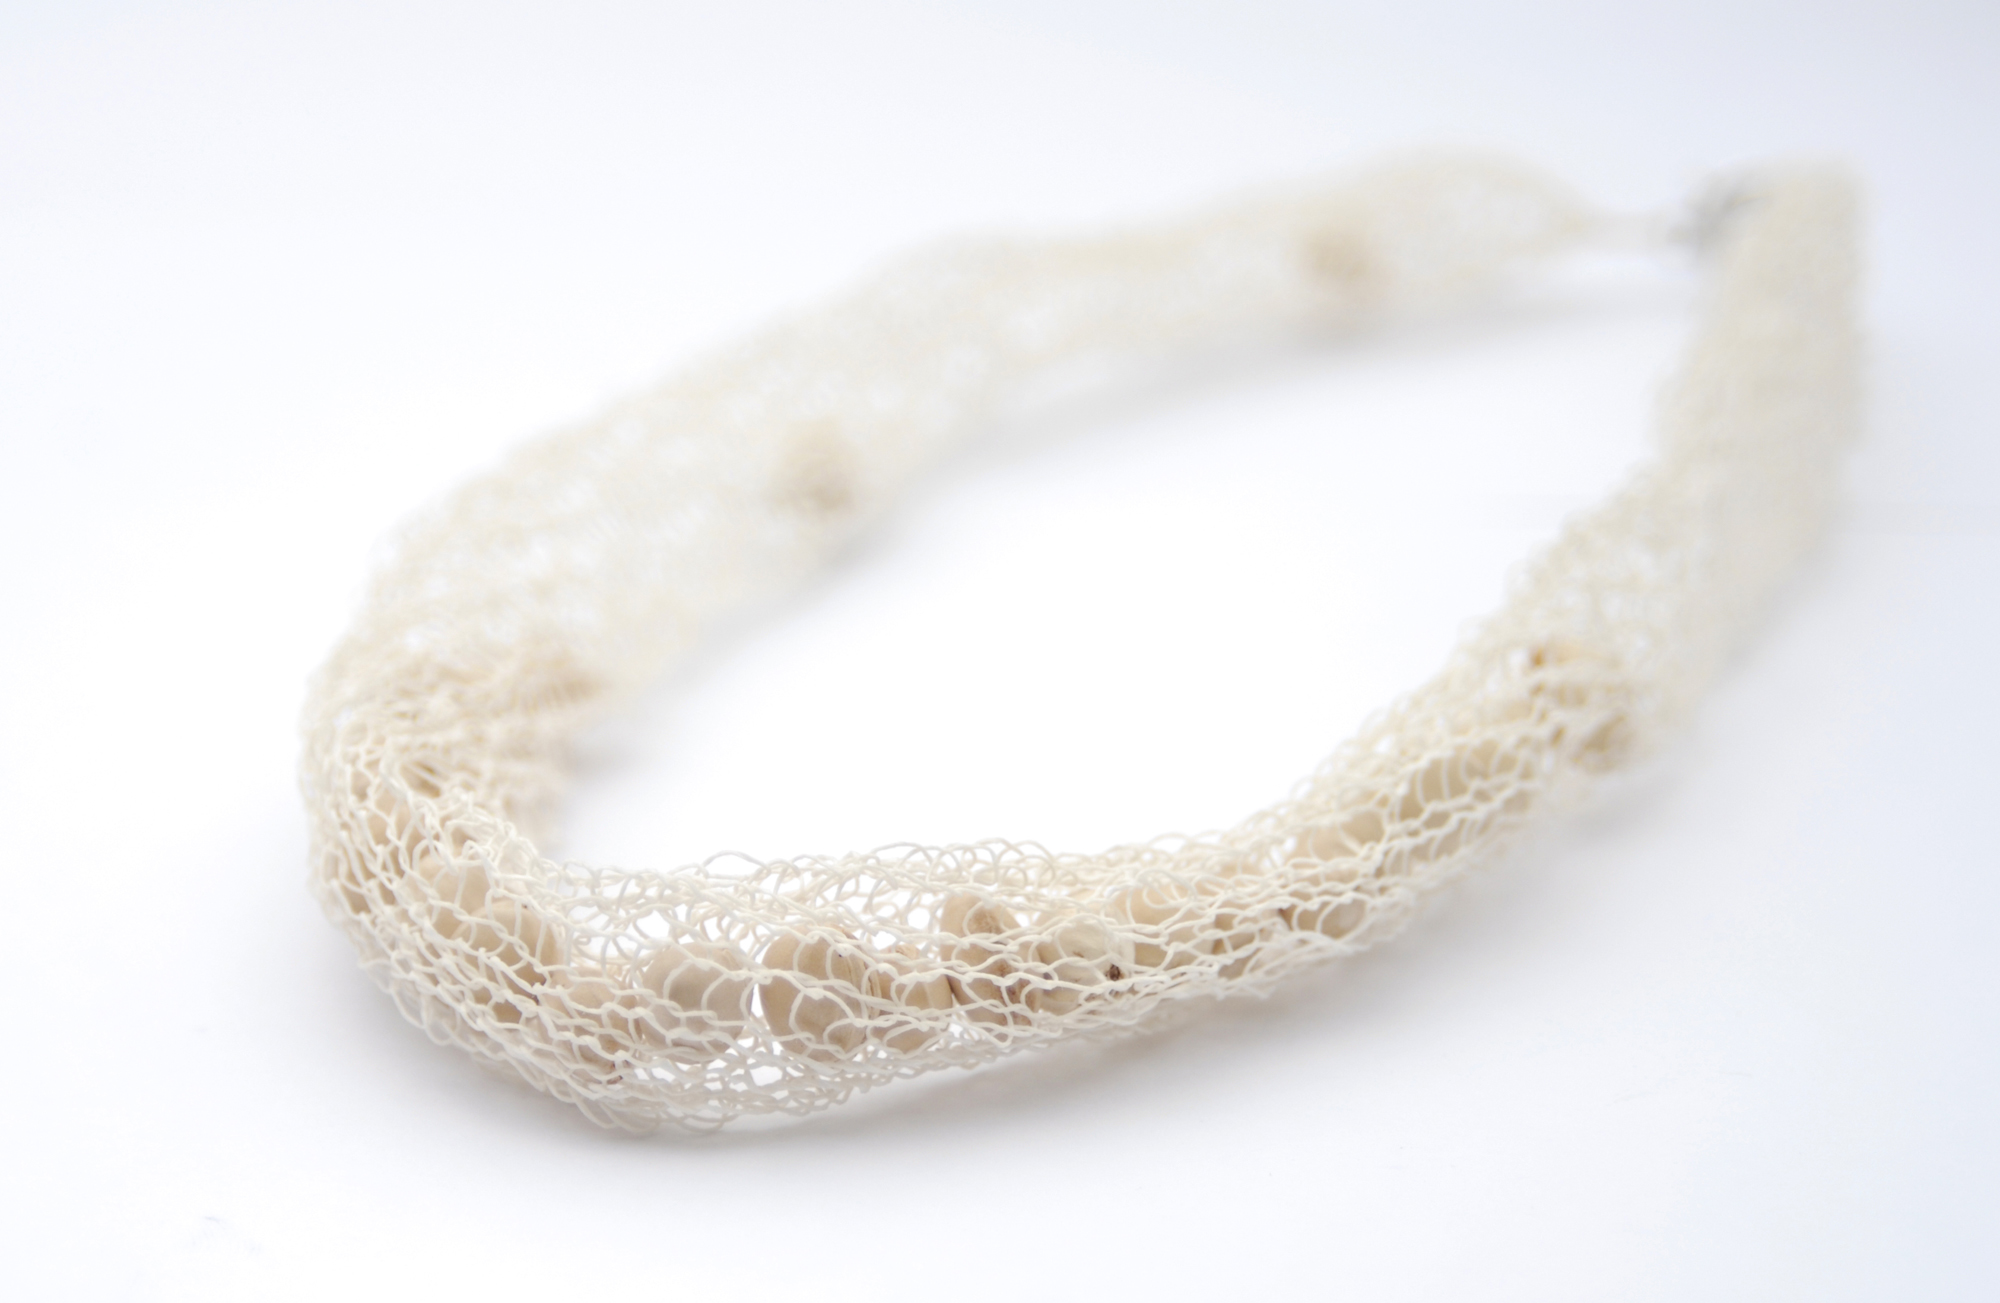 PaperPhine: Knitted Paper Yarn Necklace in White